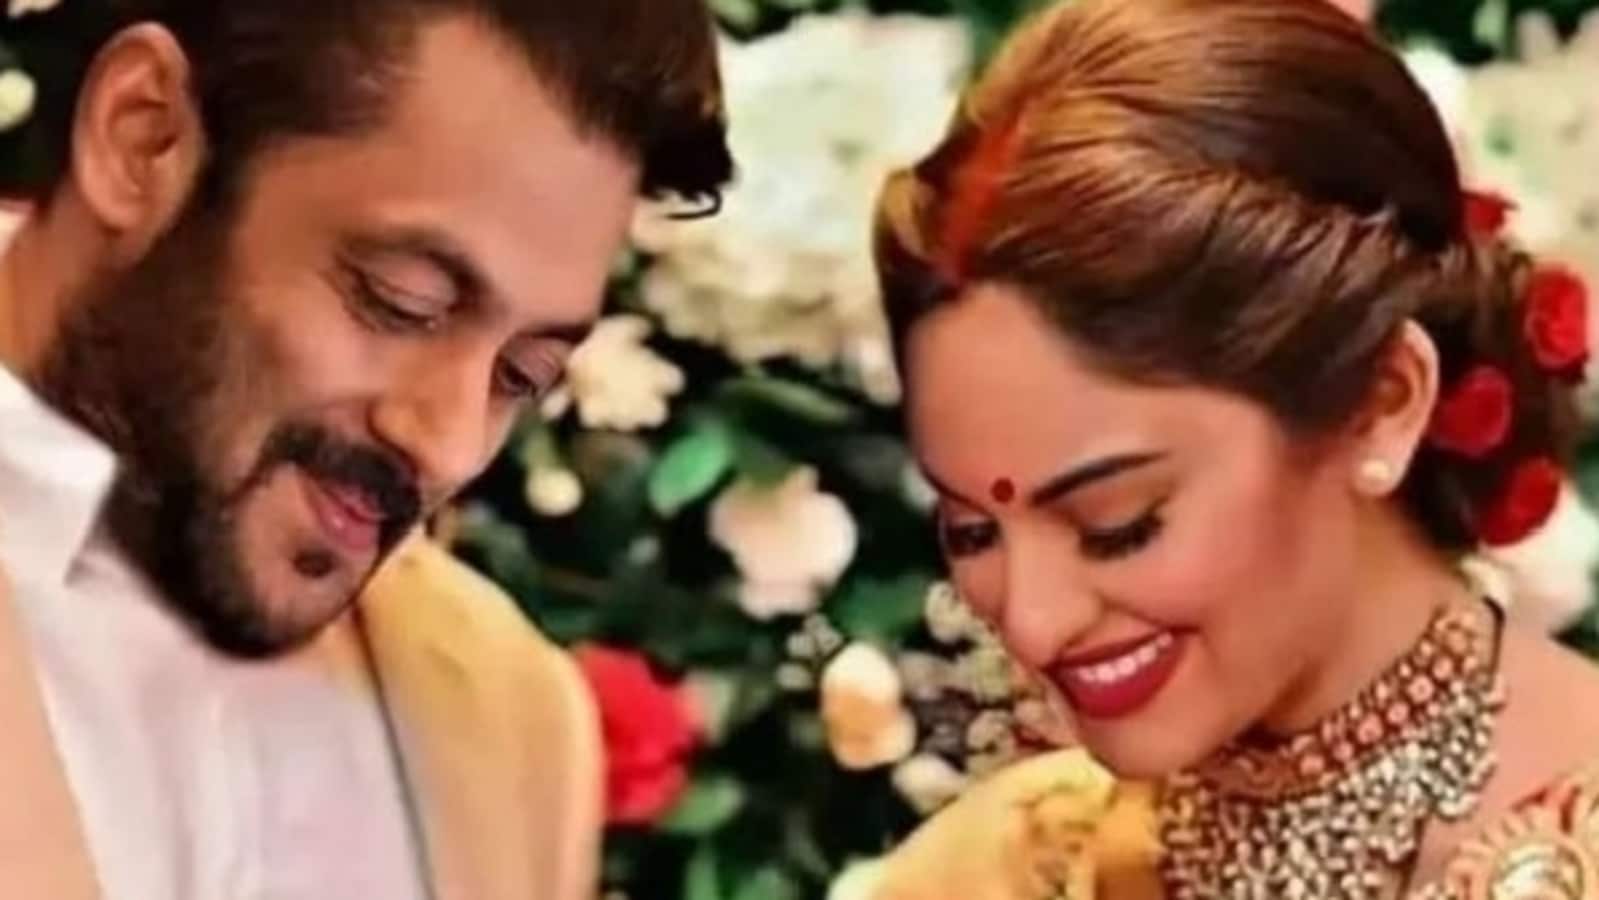 Fucking Salman Khan With Katrina - Salman, Sonakshi's fans are confused as fake pic shows them as a married  couple | Bollywood - Hindustan Times